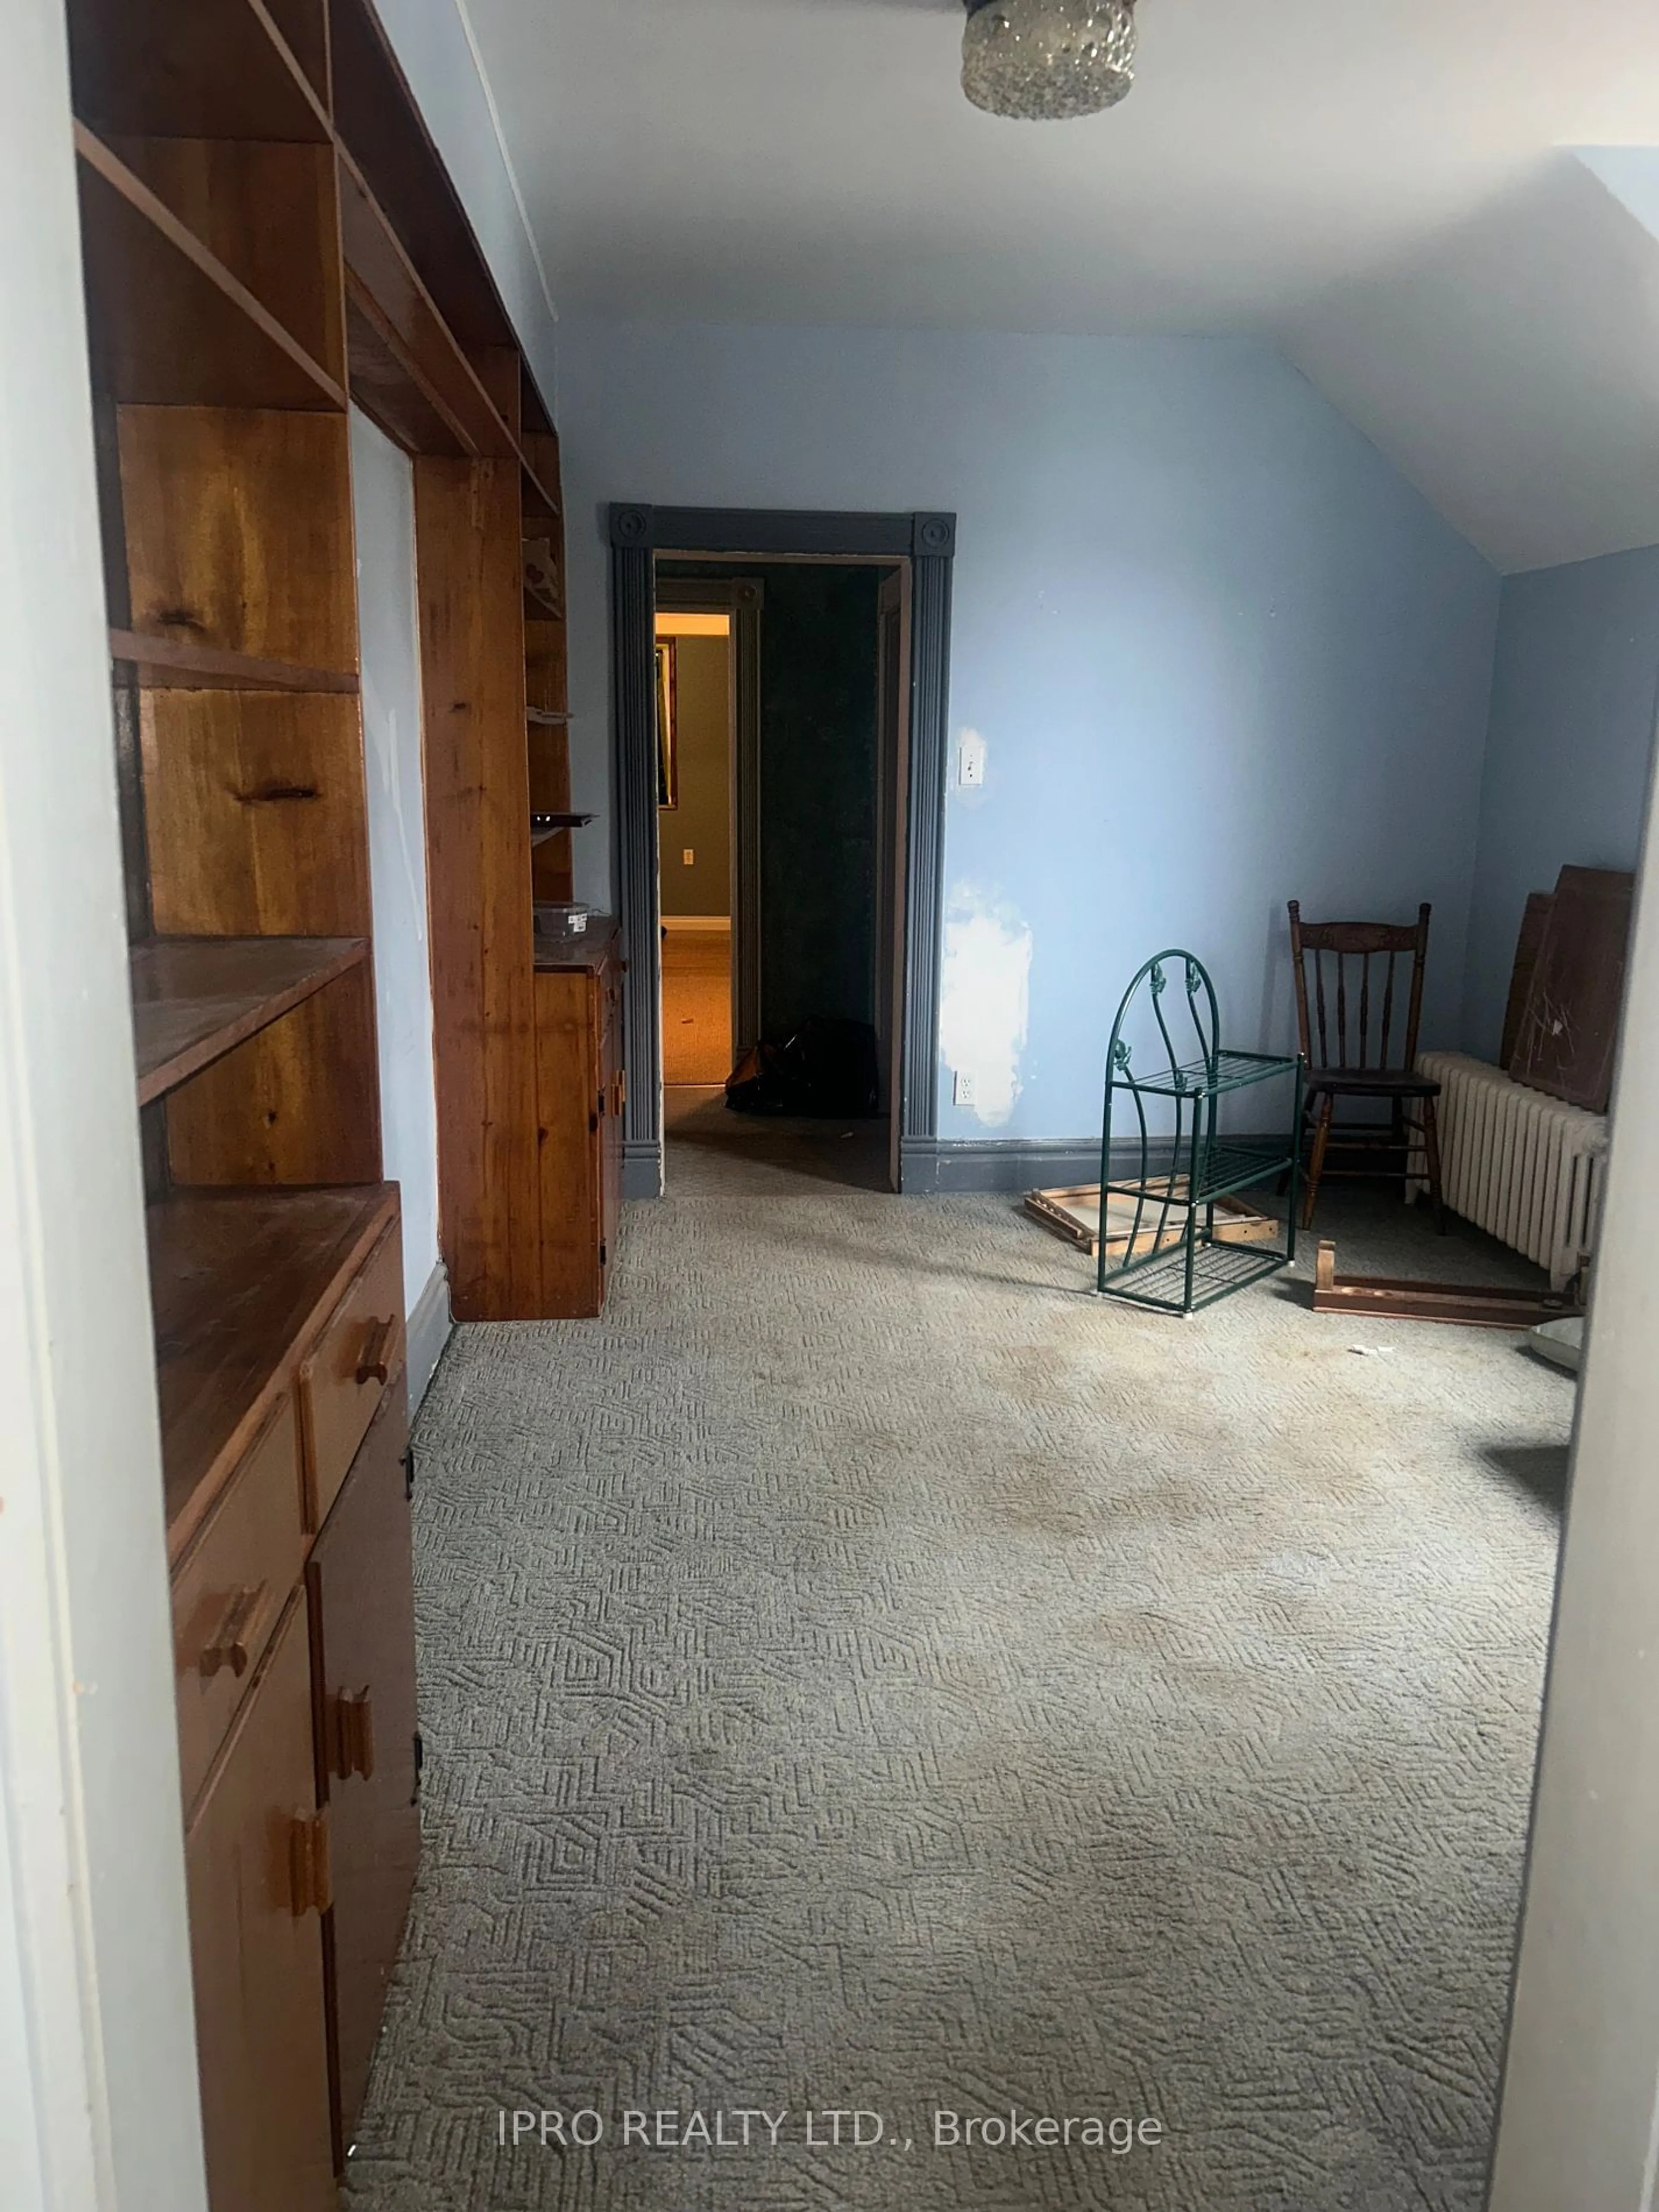 Storage room or clothes room or walk-in closet for 407 Maude St, Petrolia Ontario N0N 1R0